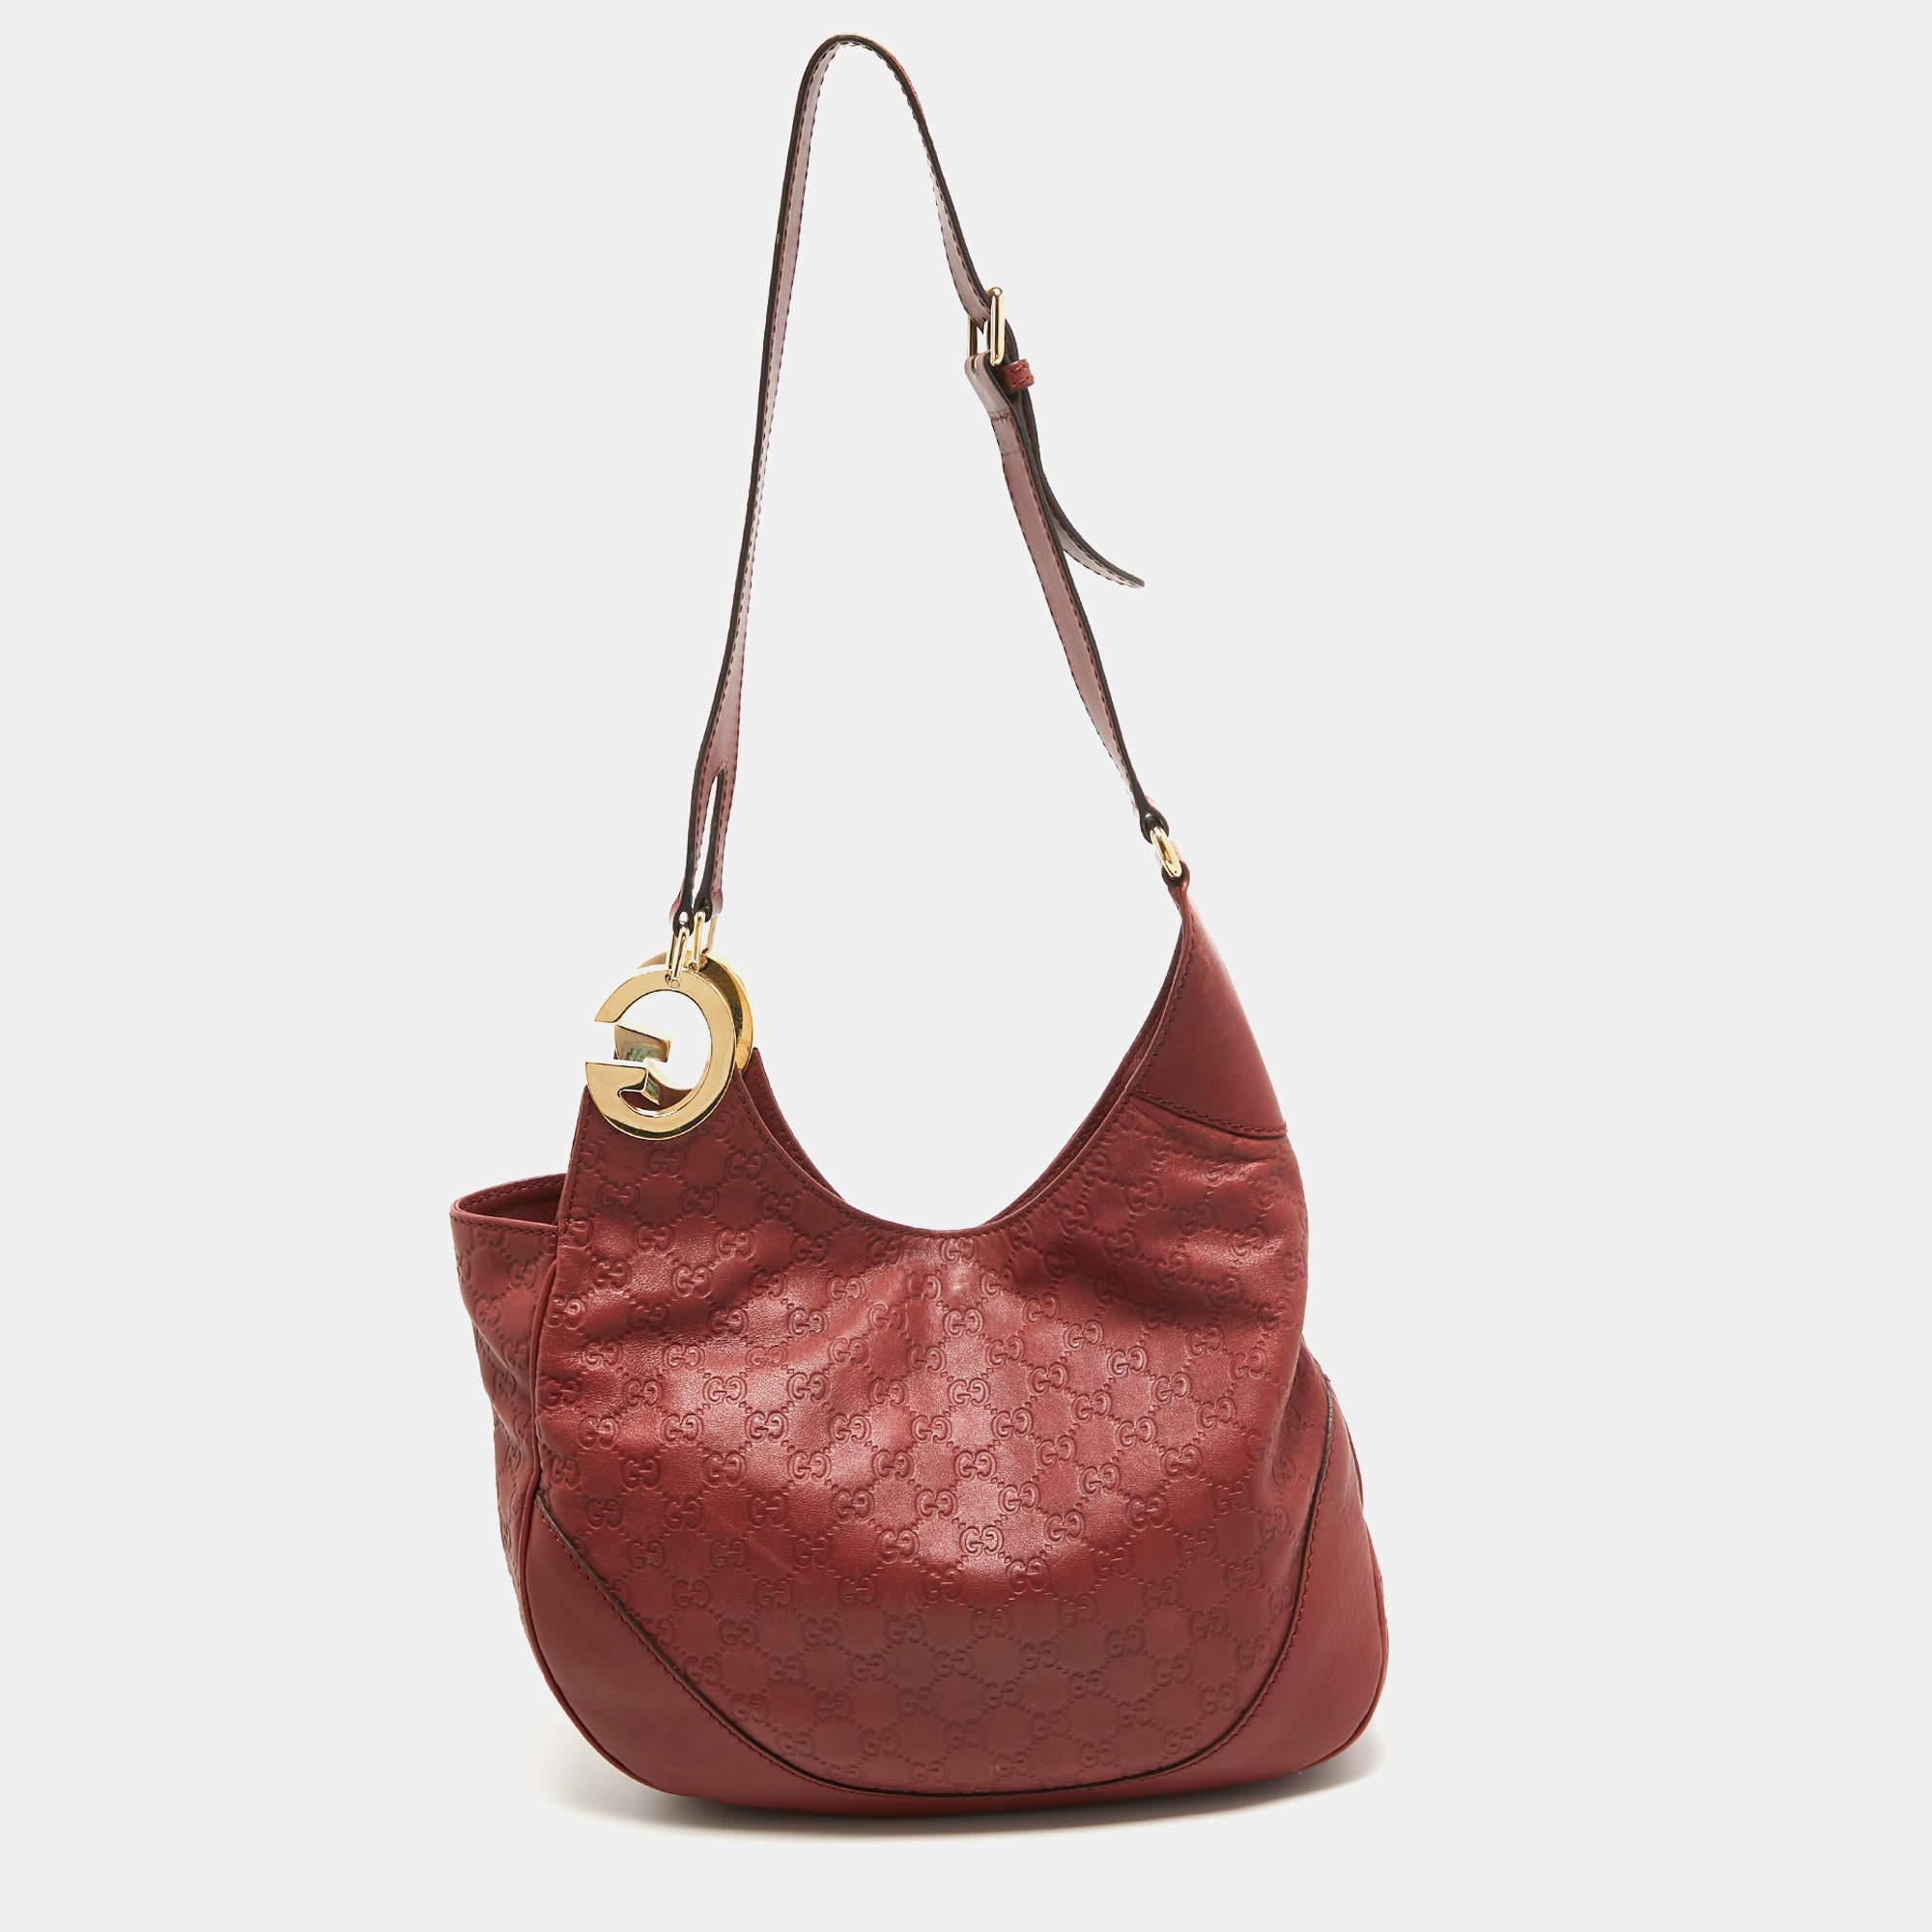 A creation that is both highly functional and appealing is this tote by Gucci. Crafted from Guccissima leather, it has a shoulder strap and a spacious interior to hold your essentials with ease.

